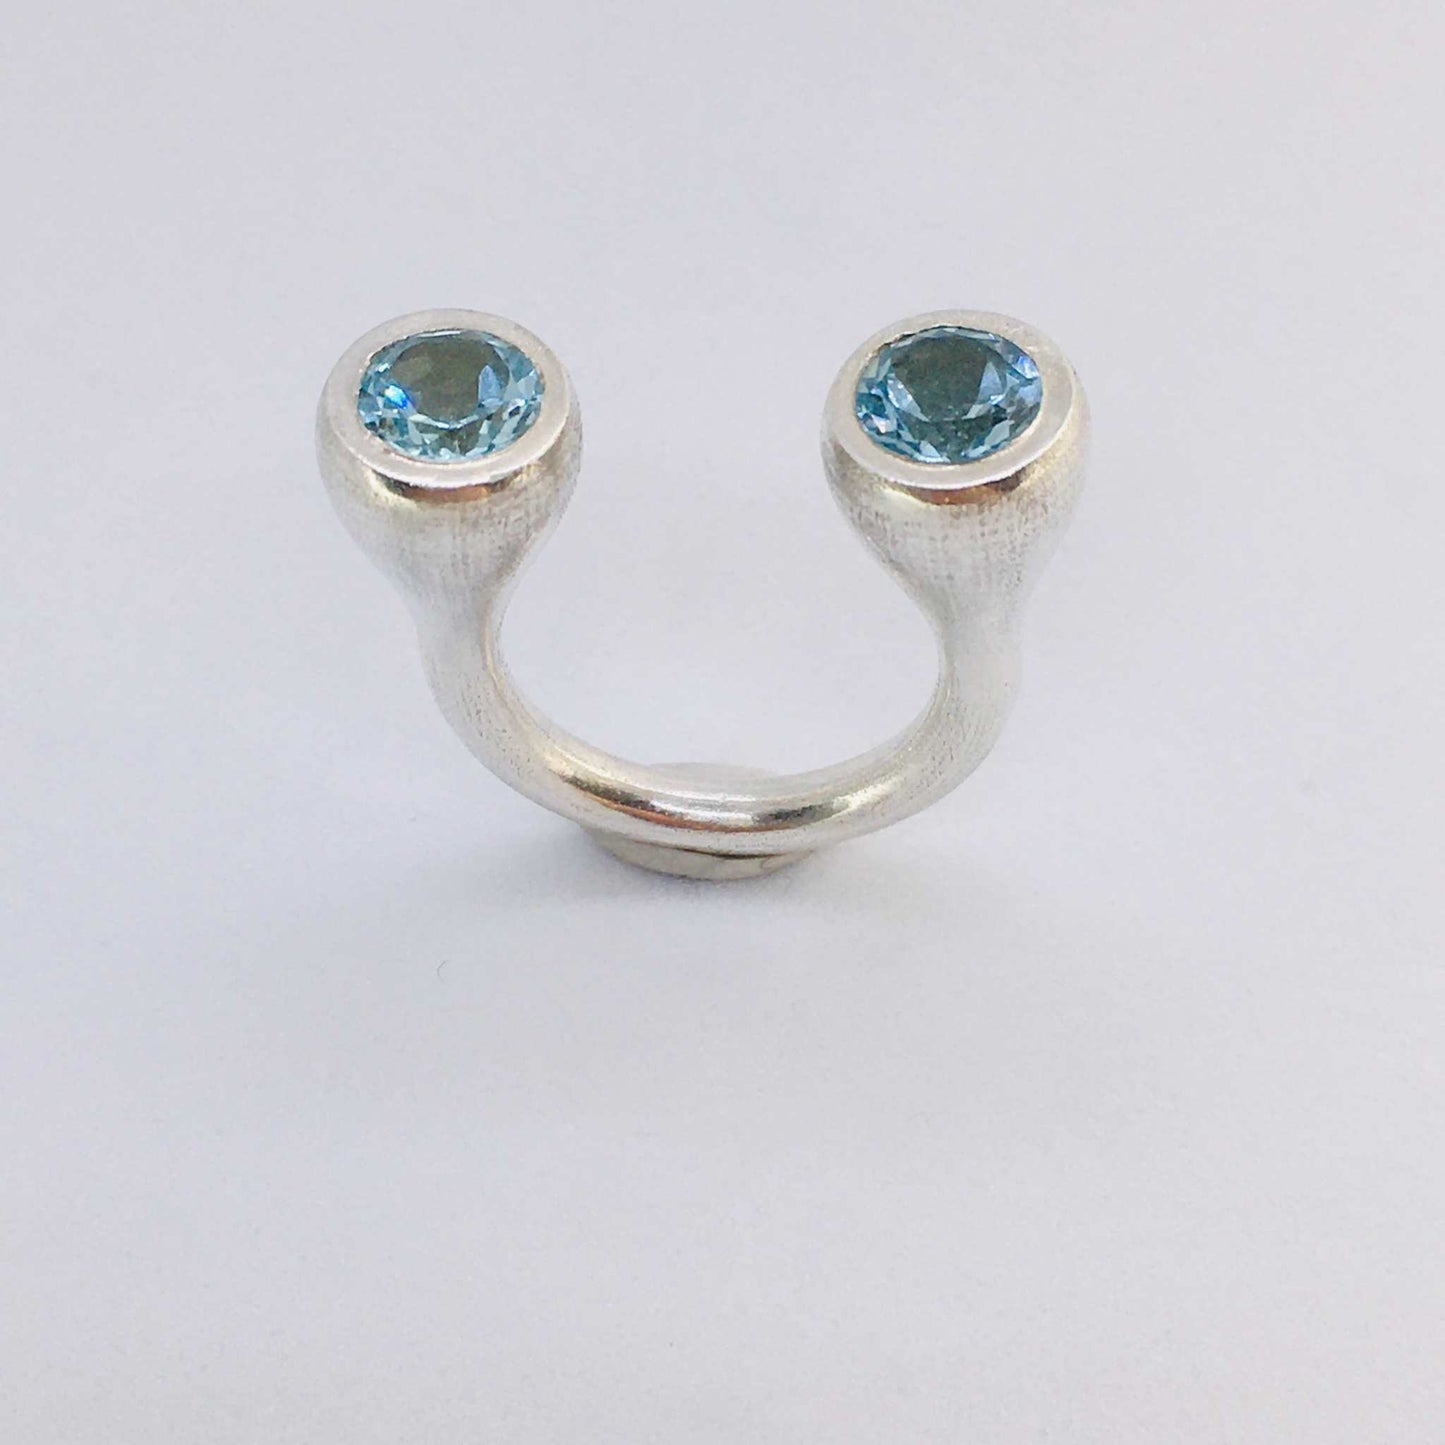 Crescent Stone Sterling Silver Ring with Blue Topaz